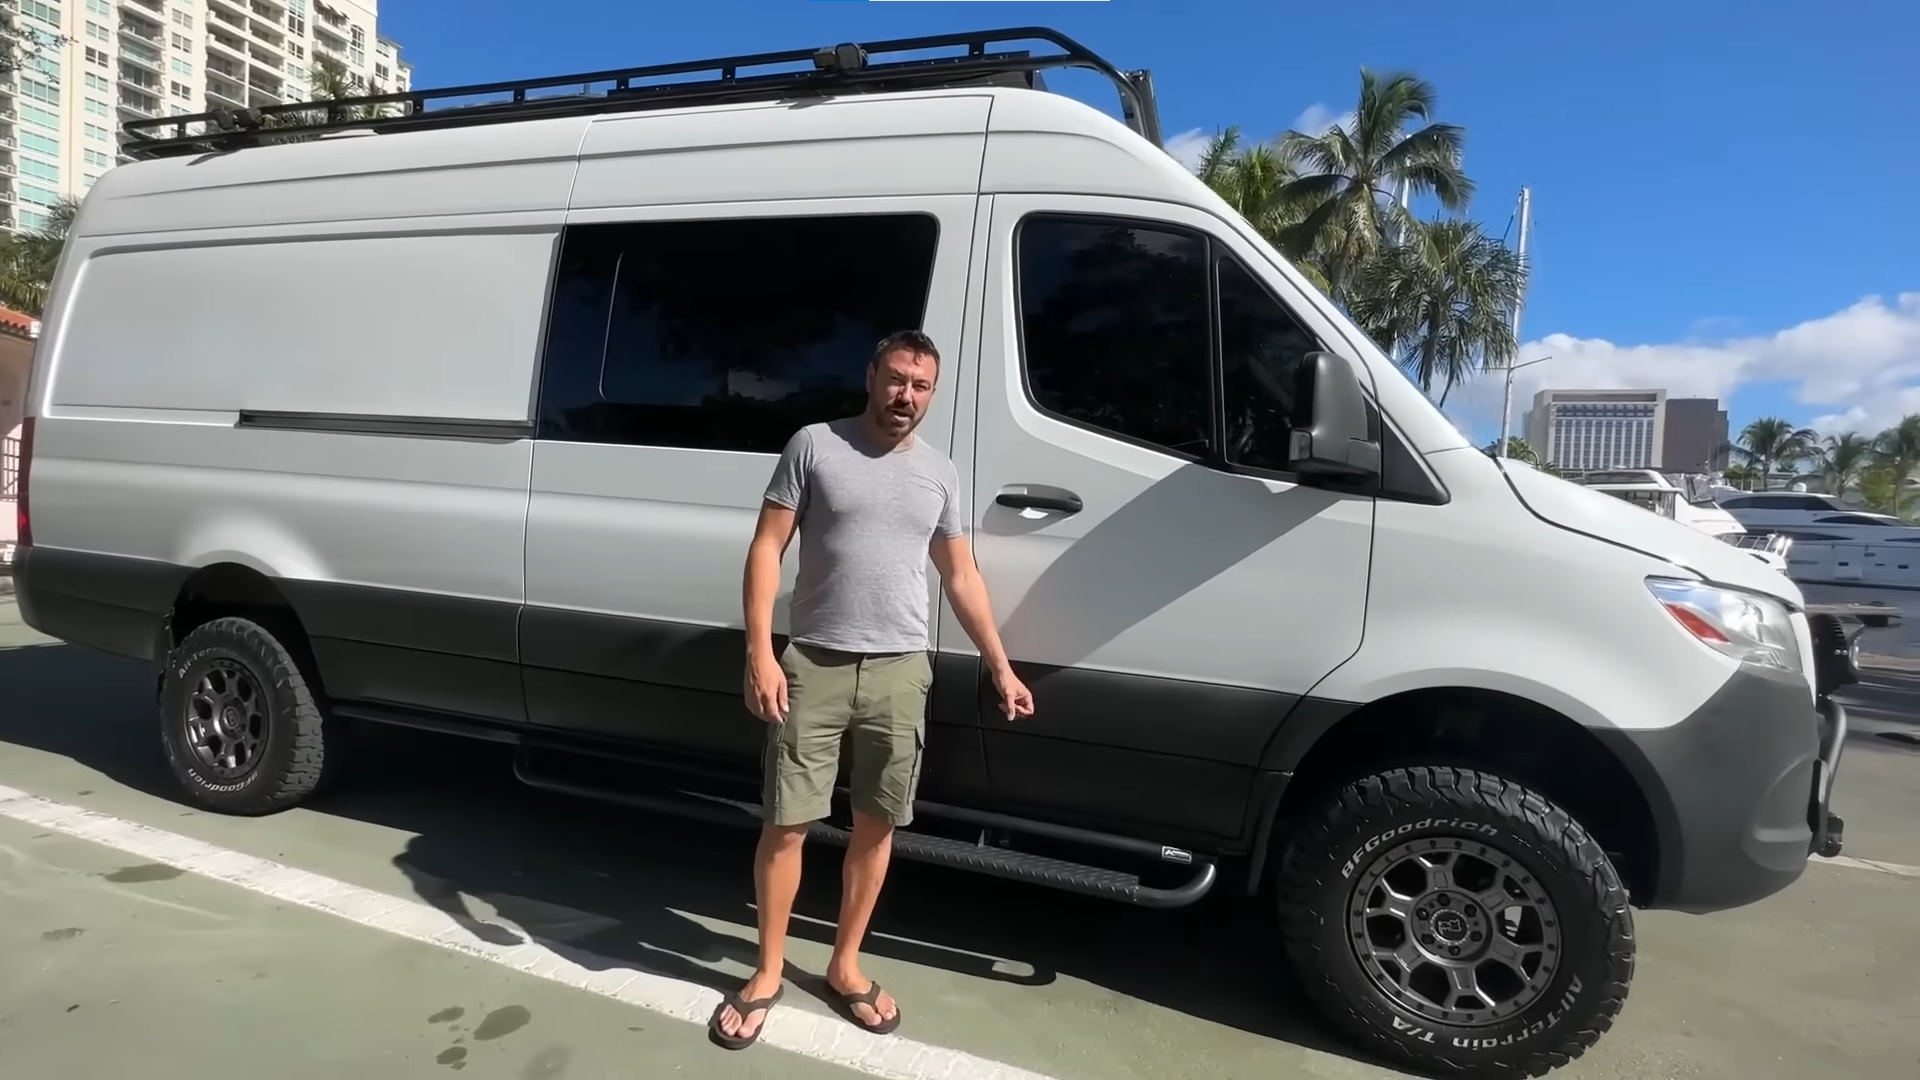 Mercedes Sprinter Camper Van With Off-Road Upgrades and an Indoor, Exposed Shower - autoevolution